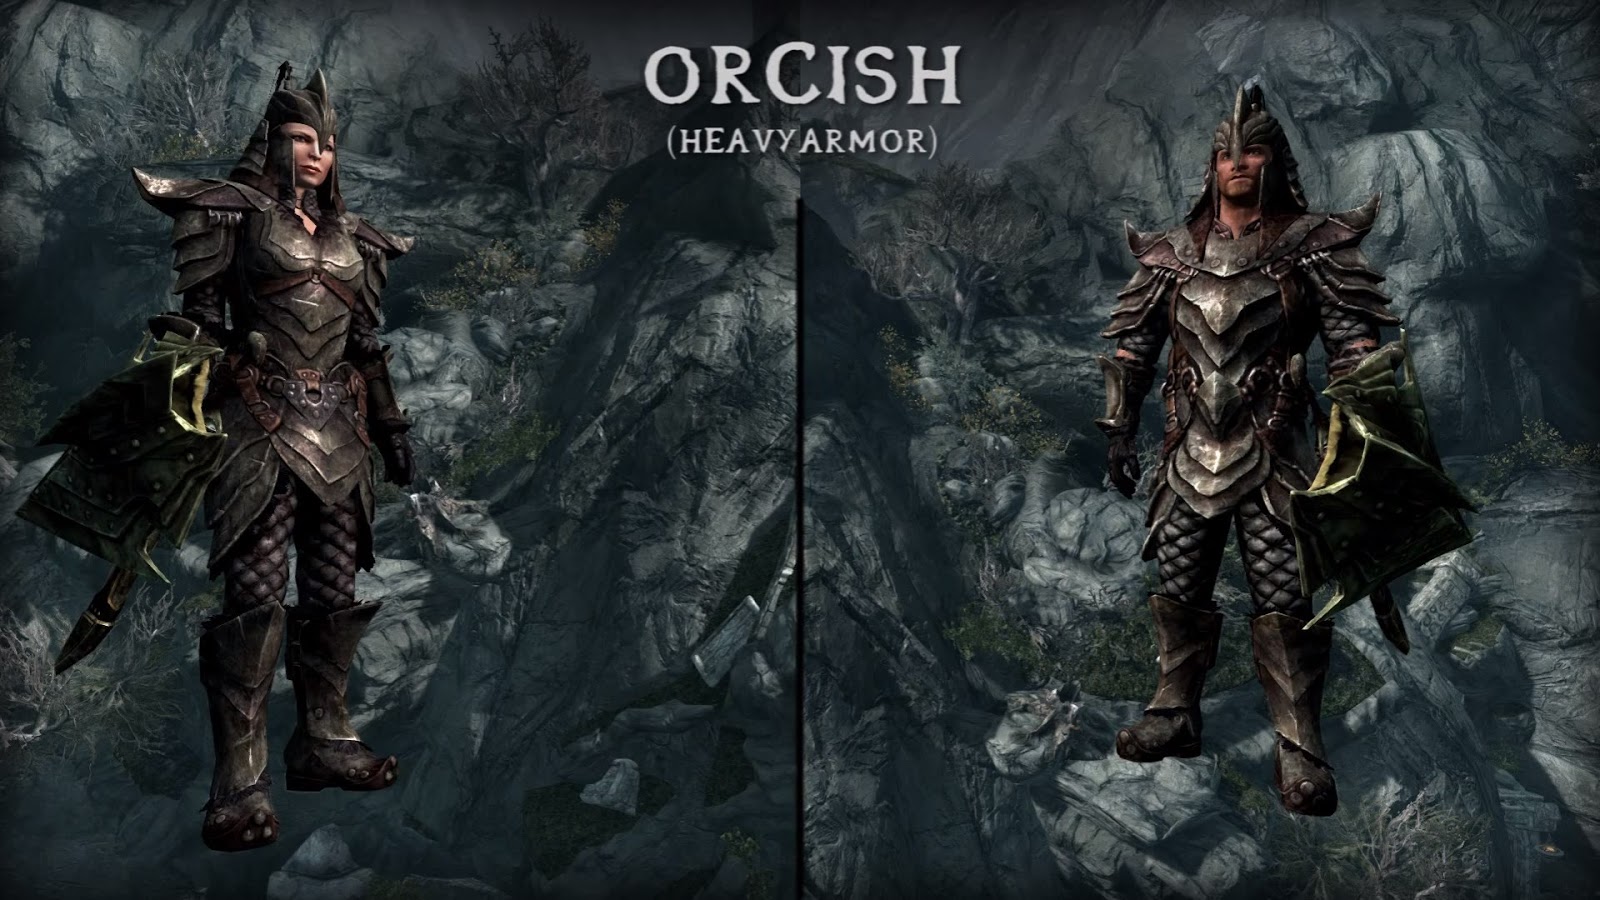 Hello Joinery Orcish Armor Skyrim.